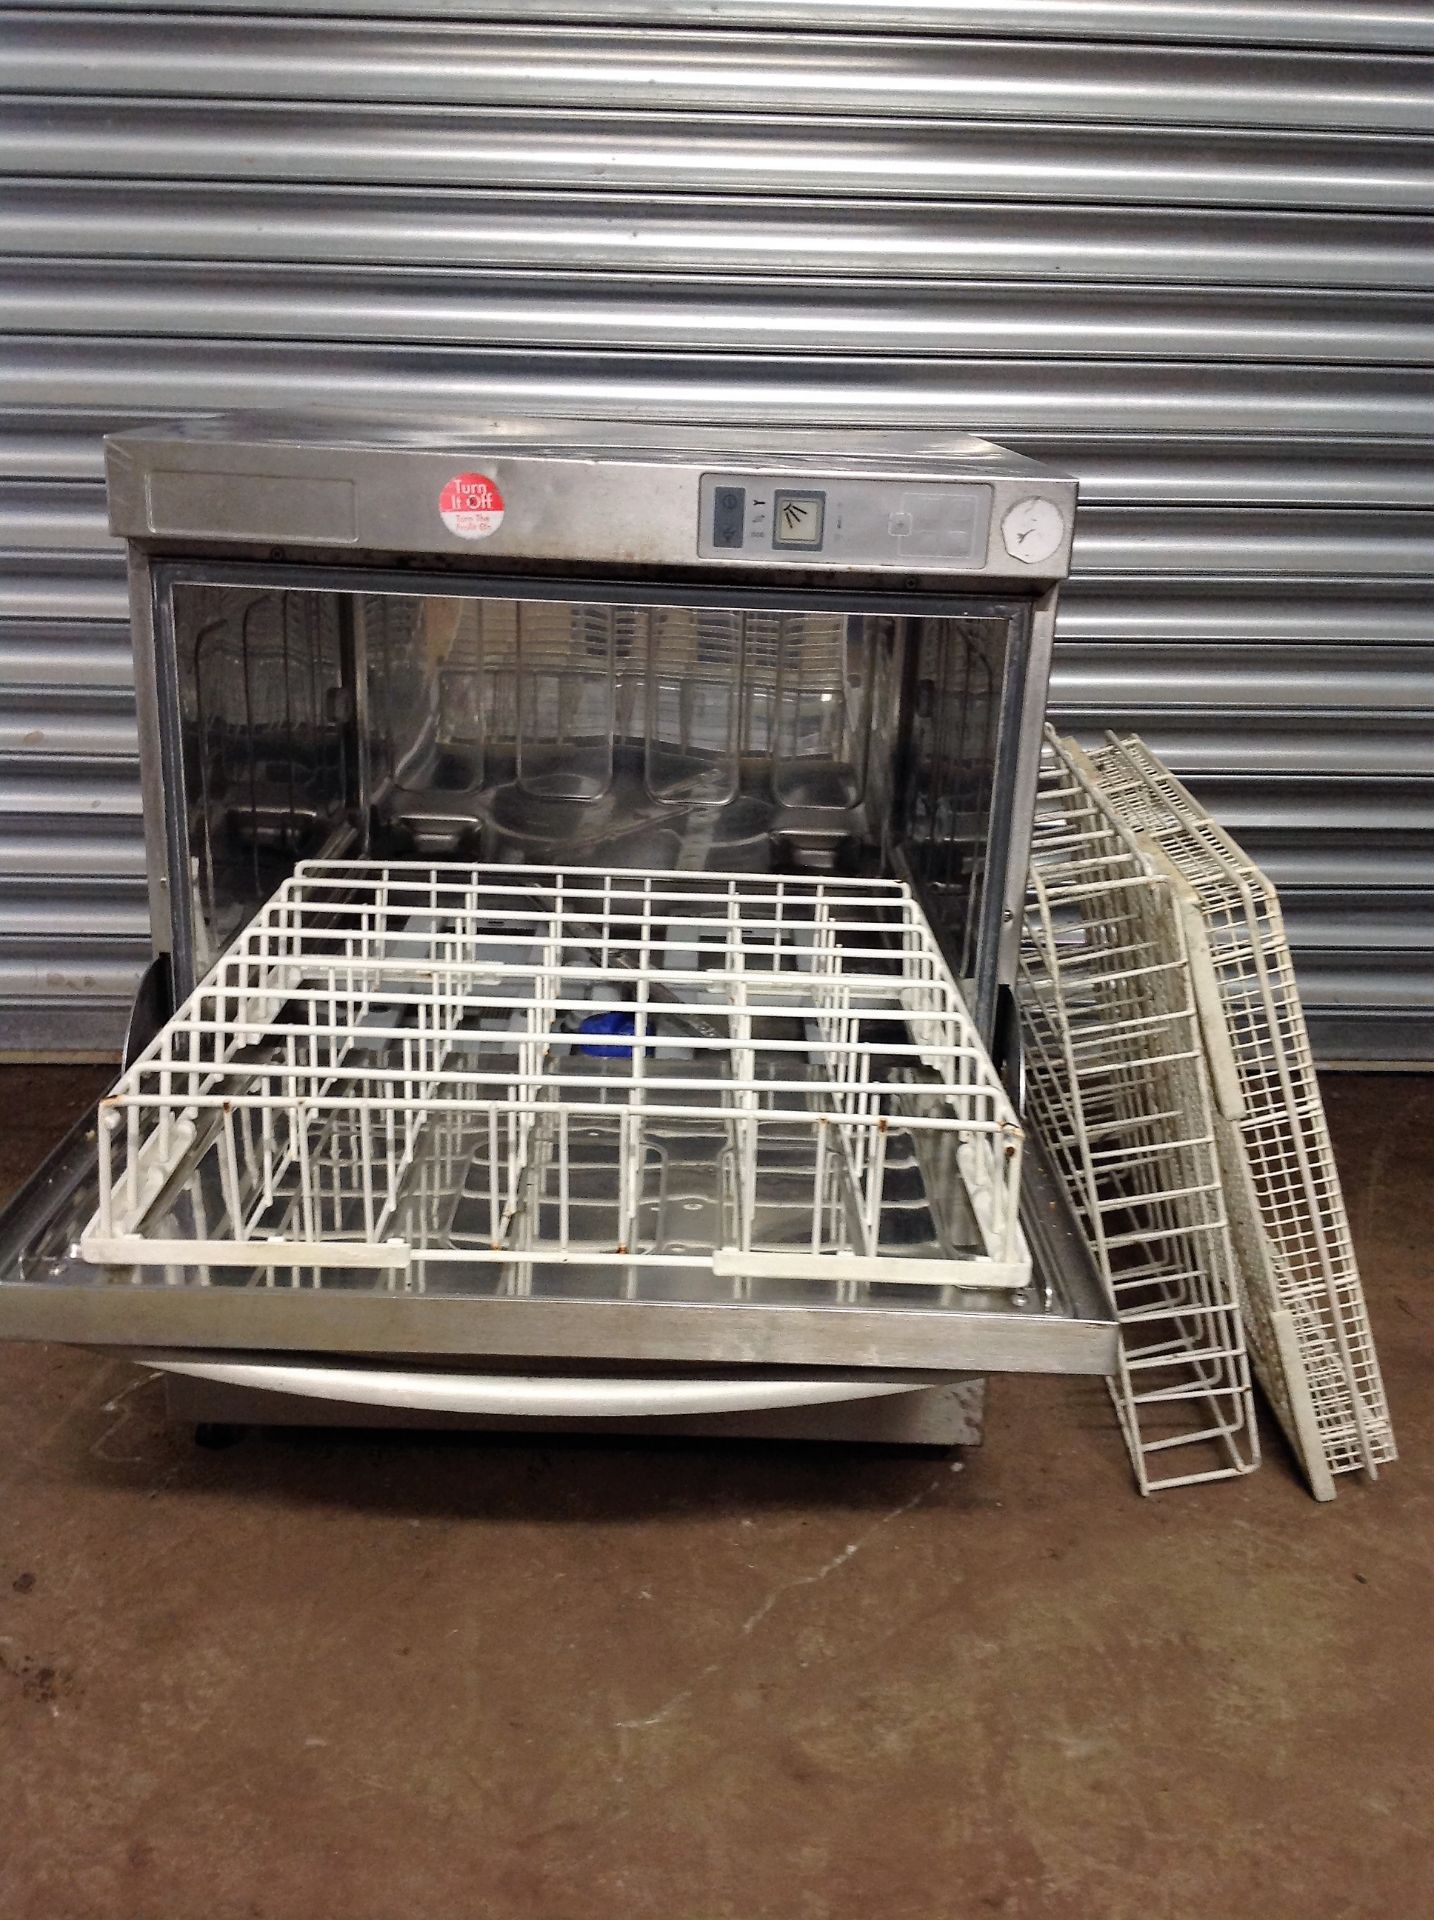 Winterhalter Stainless Steel Glasswasher With 3 Baskets - H: 74cm W: 60cm D: 60cm - Image 2 of 5